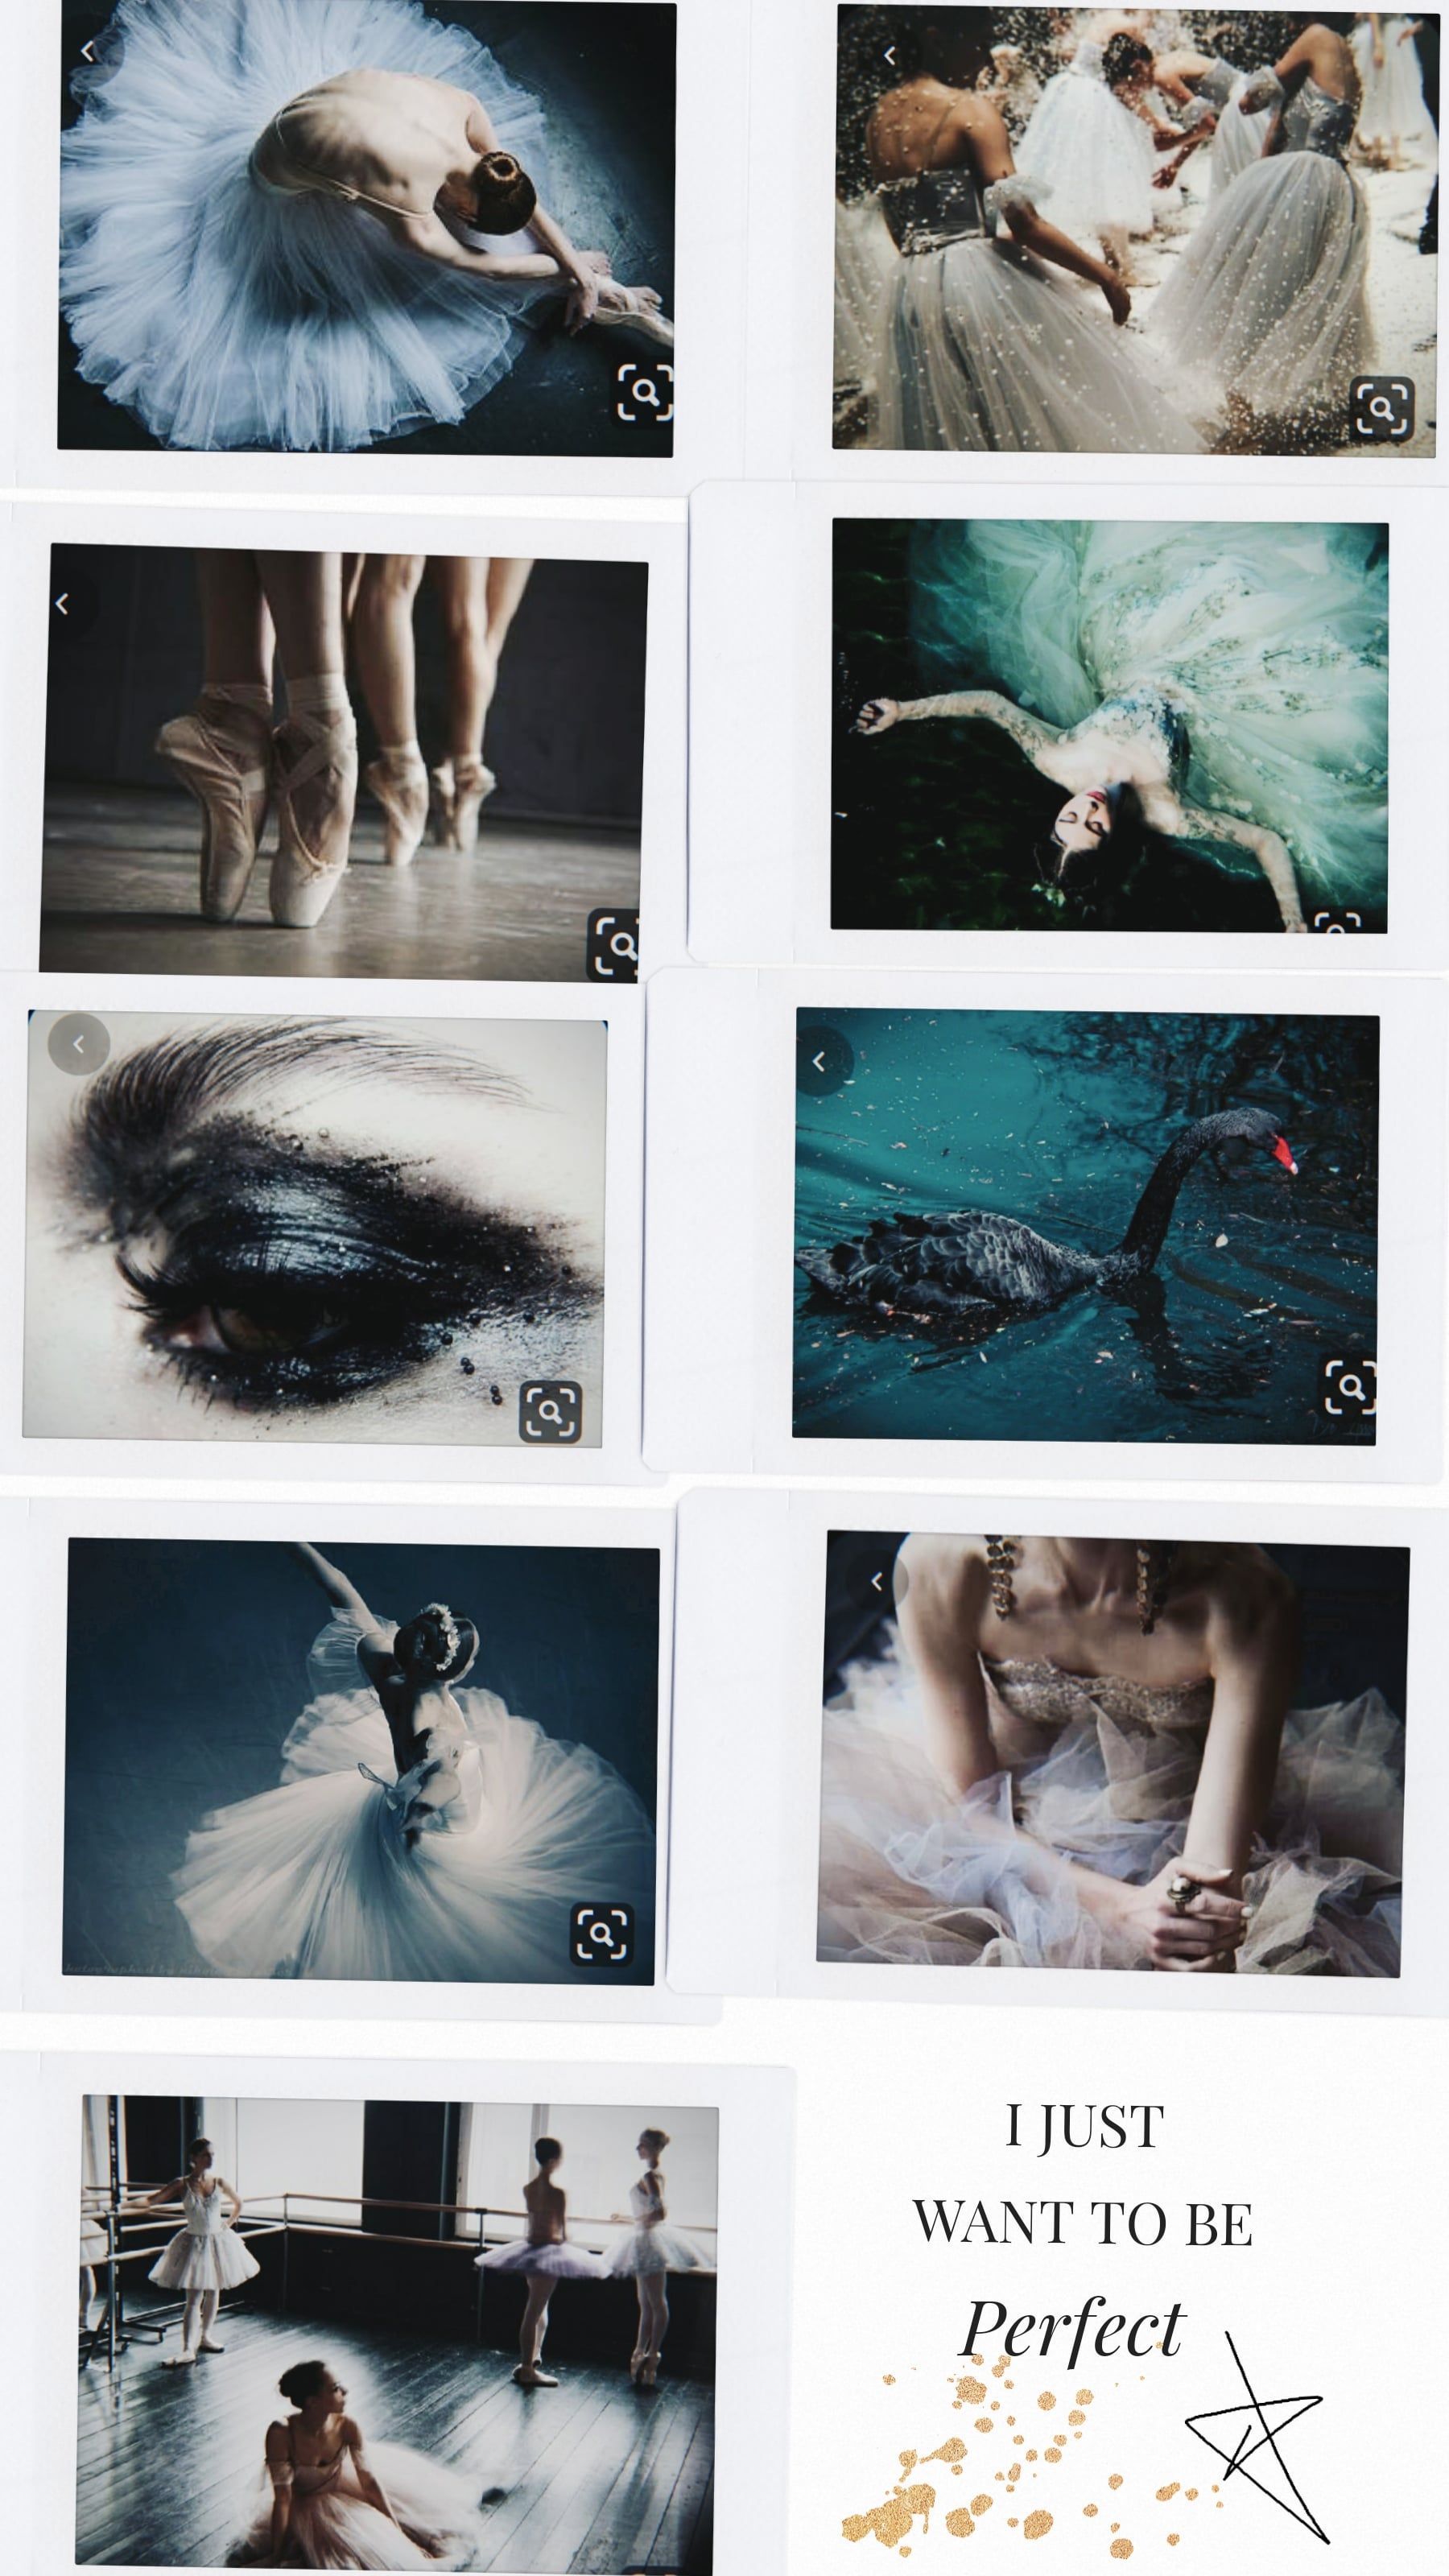 What Are Your Thoughts About Dark Ballet Black Swan Type Of Choices Book? I Did A Mood Board About A Ballet Focused Book A While Ago And Thought: What If PB Made A